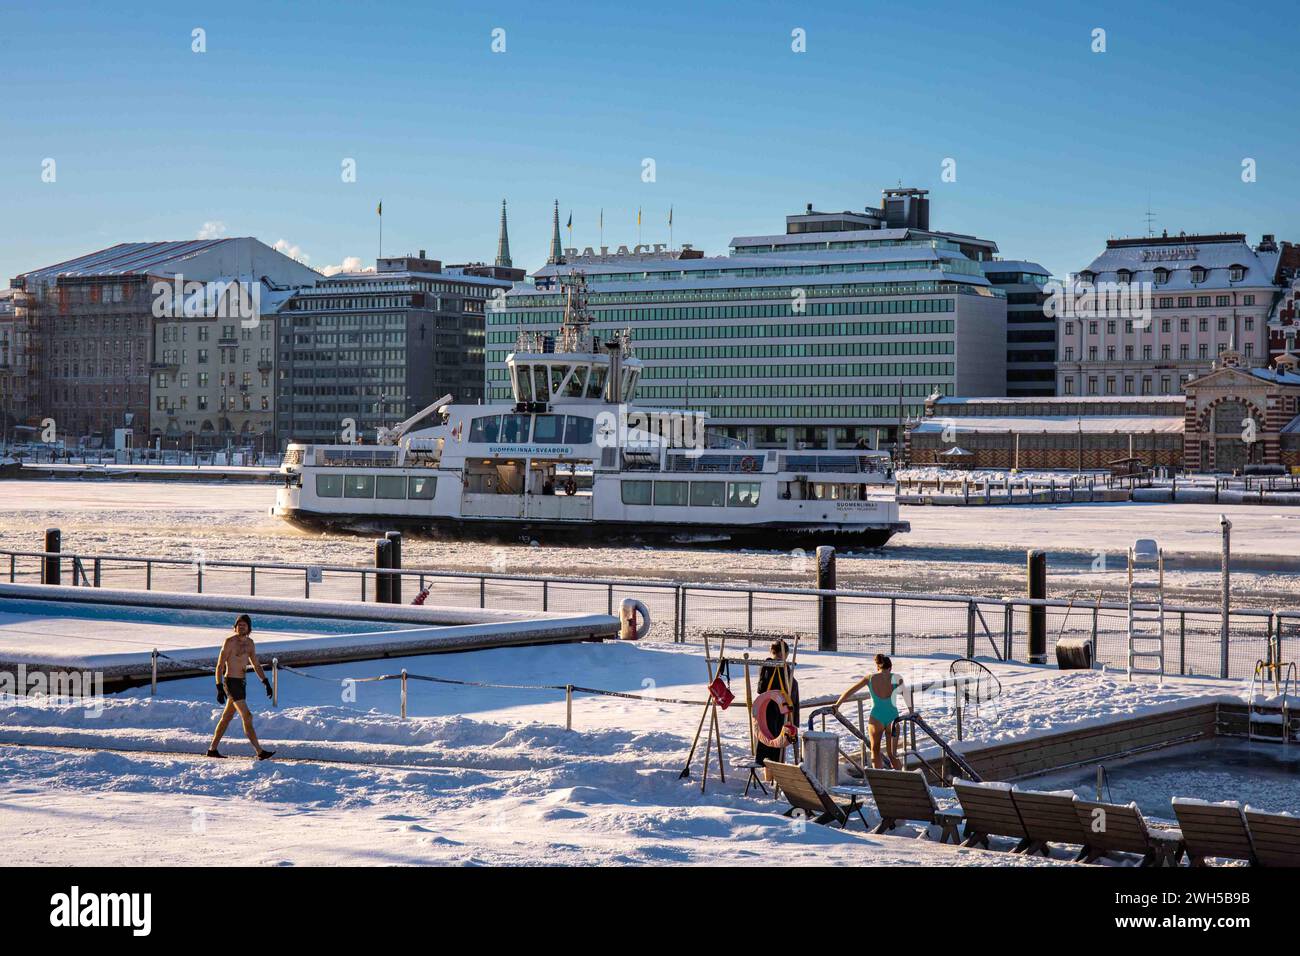 People on snow covered Allas Sea Pool floating deck with Suomenlinna II ferry in the background on a sunny winter day in Helsinki, Finland Stock Photo